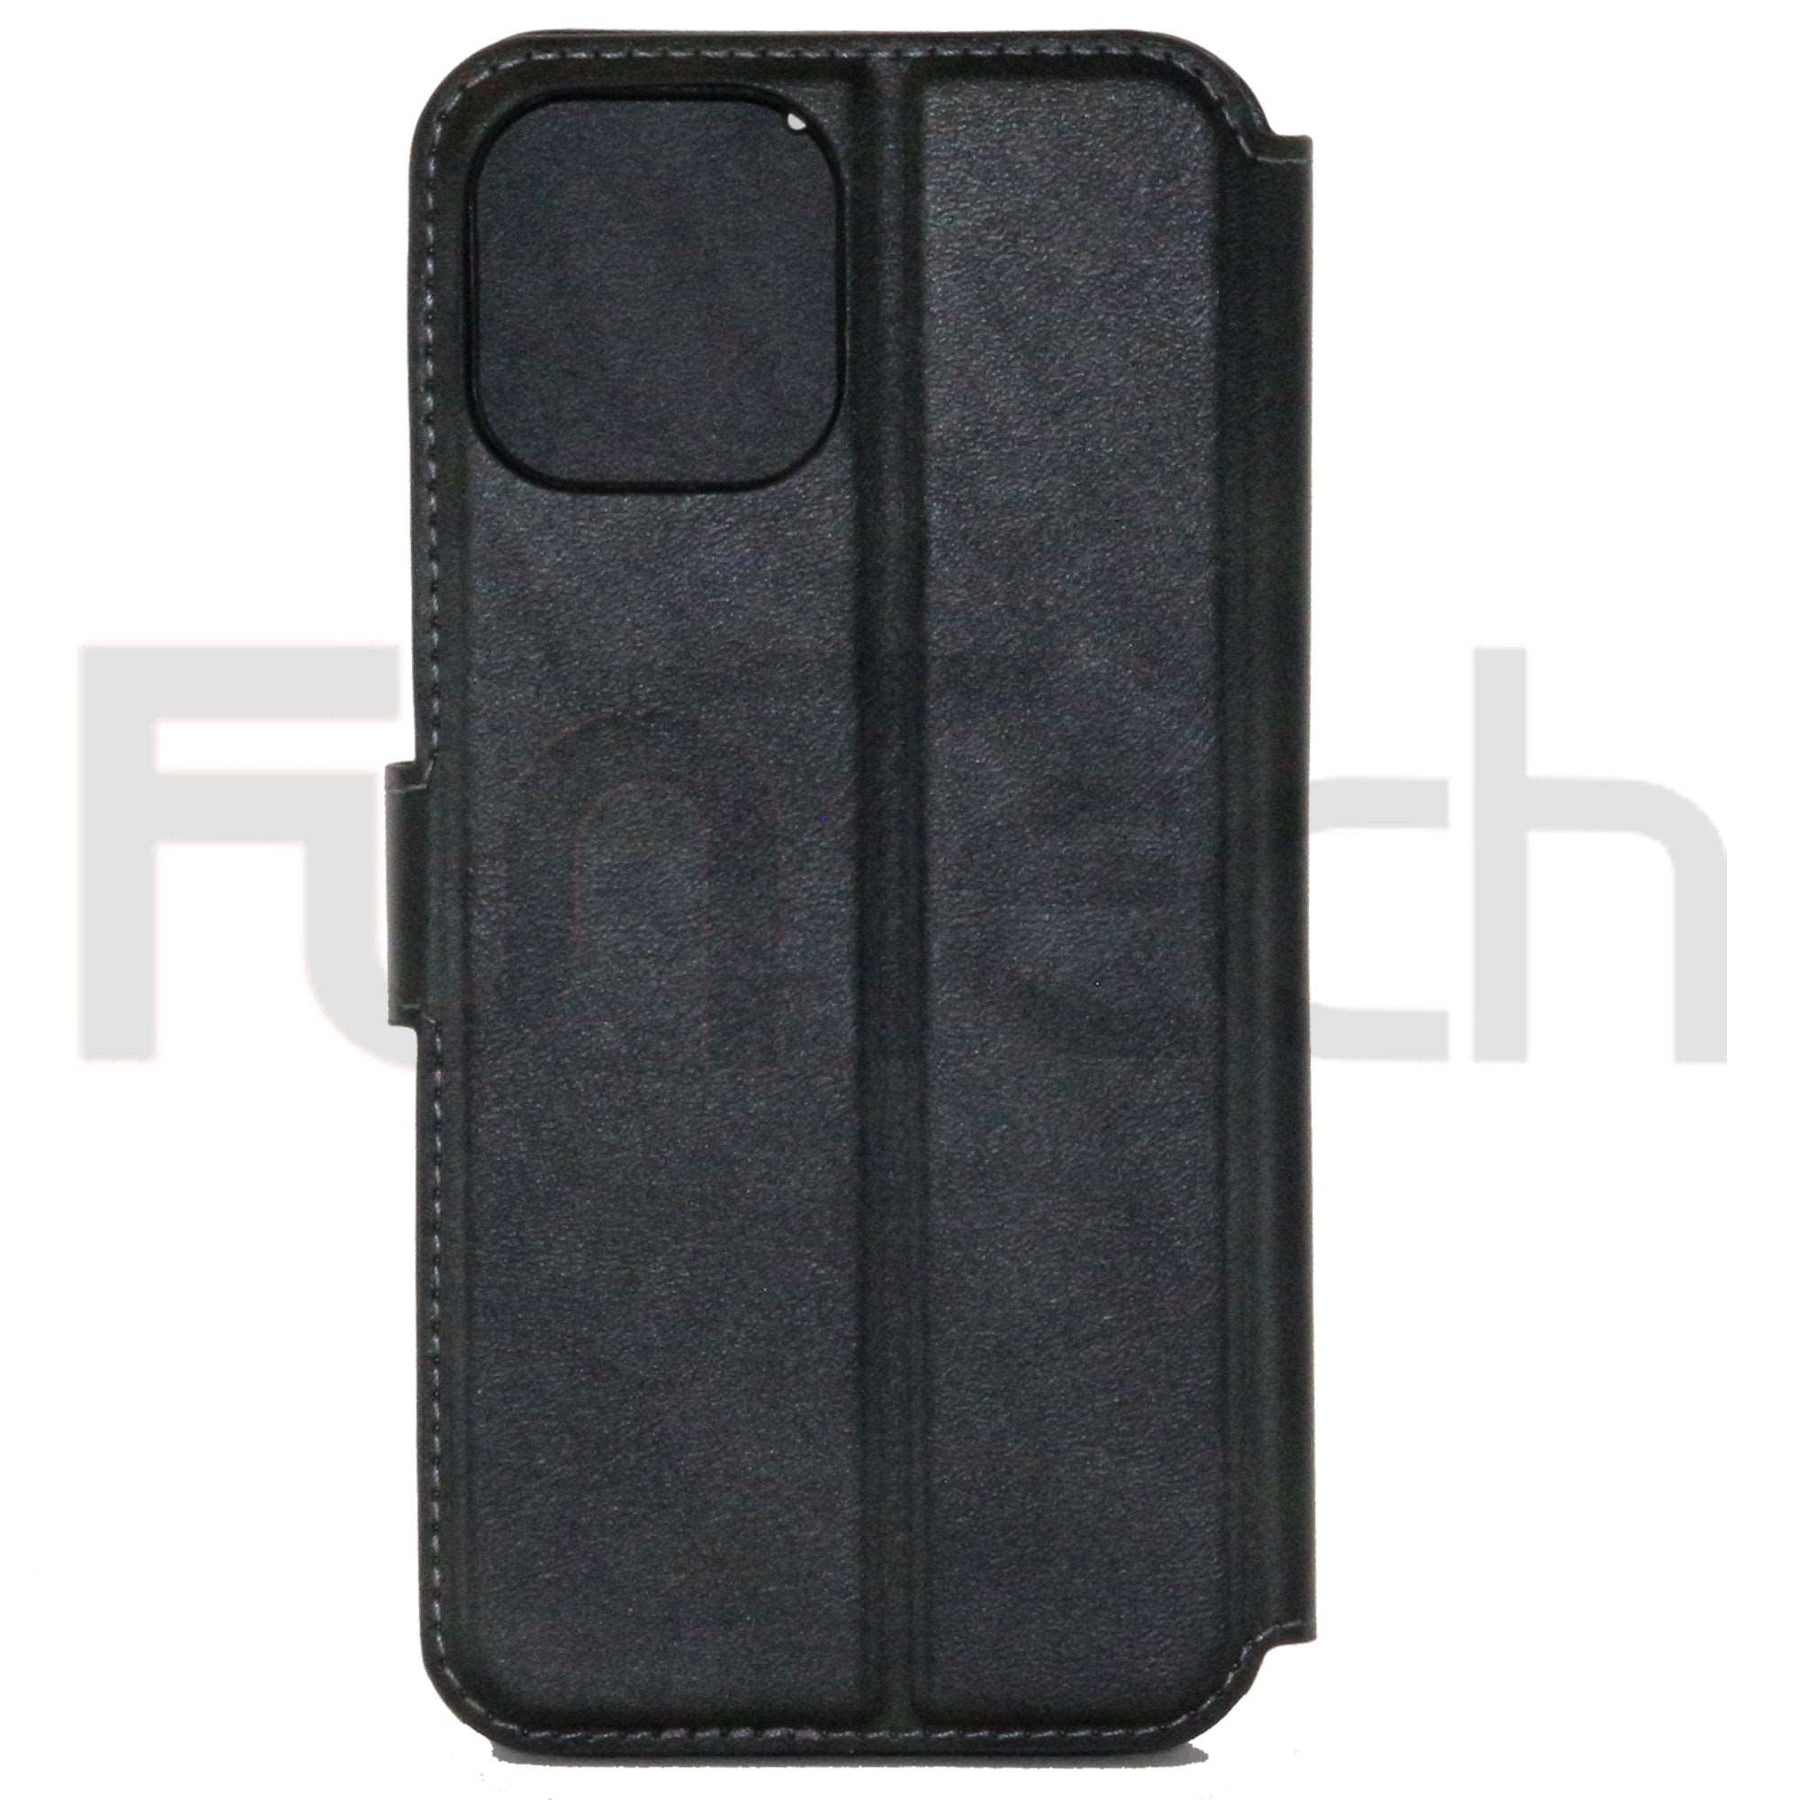 Computer Gadgets, Phone Accessories, Phone Cover Cases, FunTech Telephone Repair, Smart Devices, Smart IOT, Drop & Shock Proof Cases, High Quality Tablet Cases, High Quality Phone Cases, Samsung, iPad, Apple, Nokia,